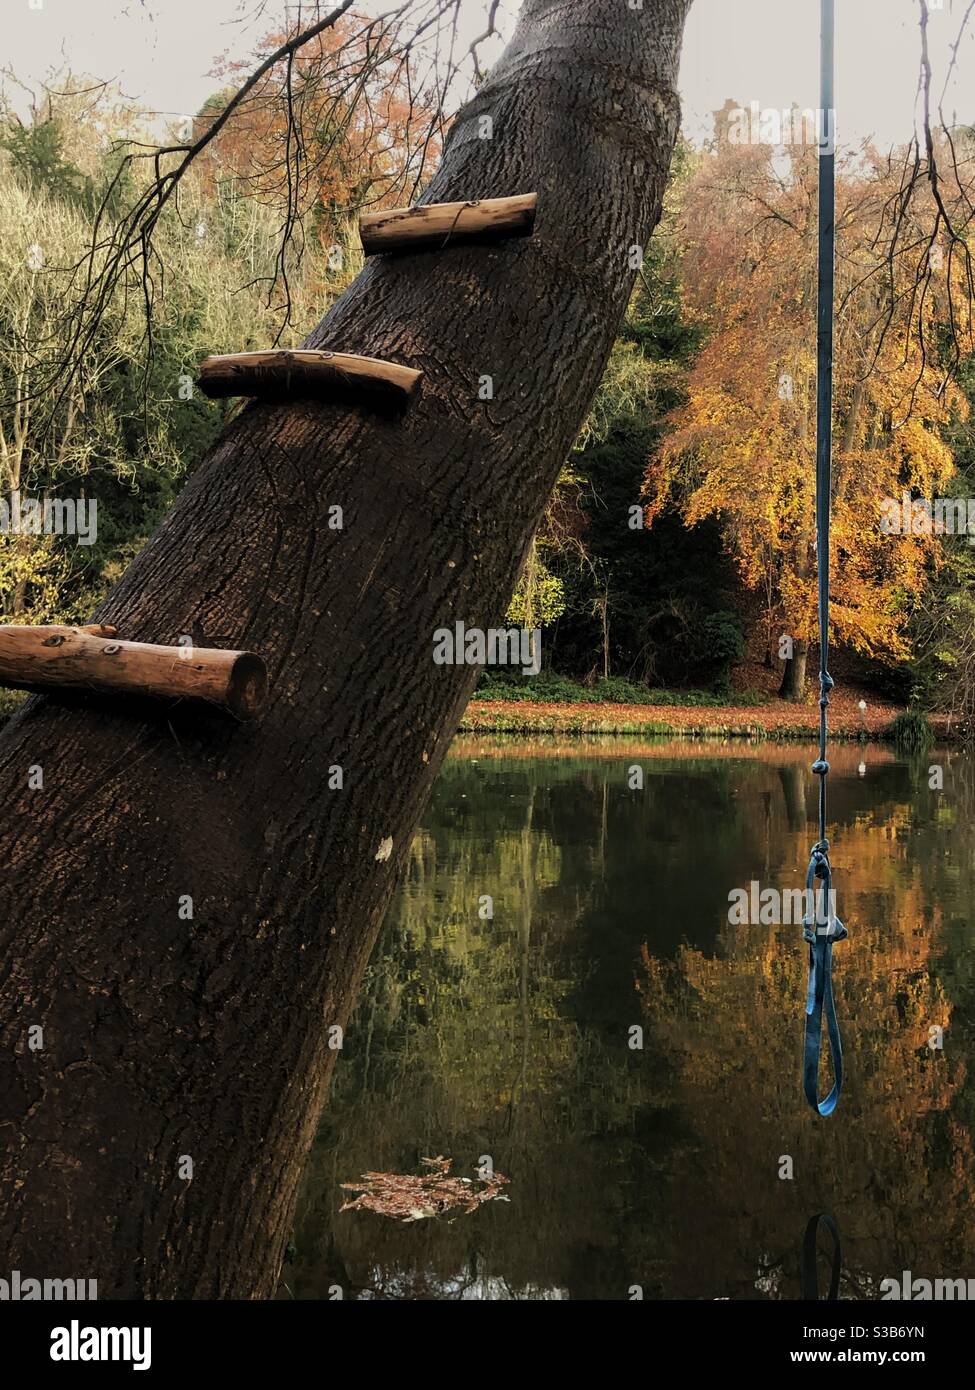 Climbing tree and rope swing by River Thames at Maidenhead during Autumn 2020 Covid lockdown. Stock Photo